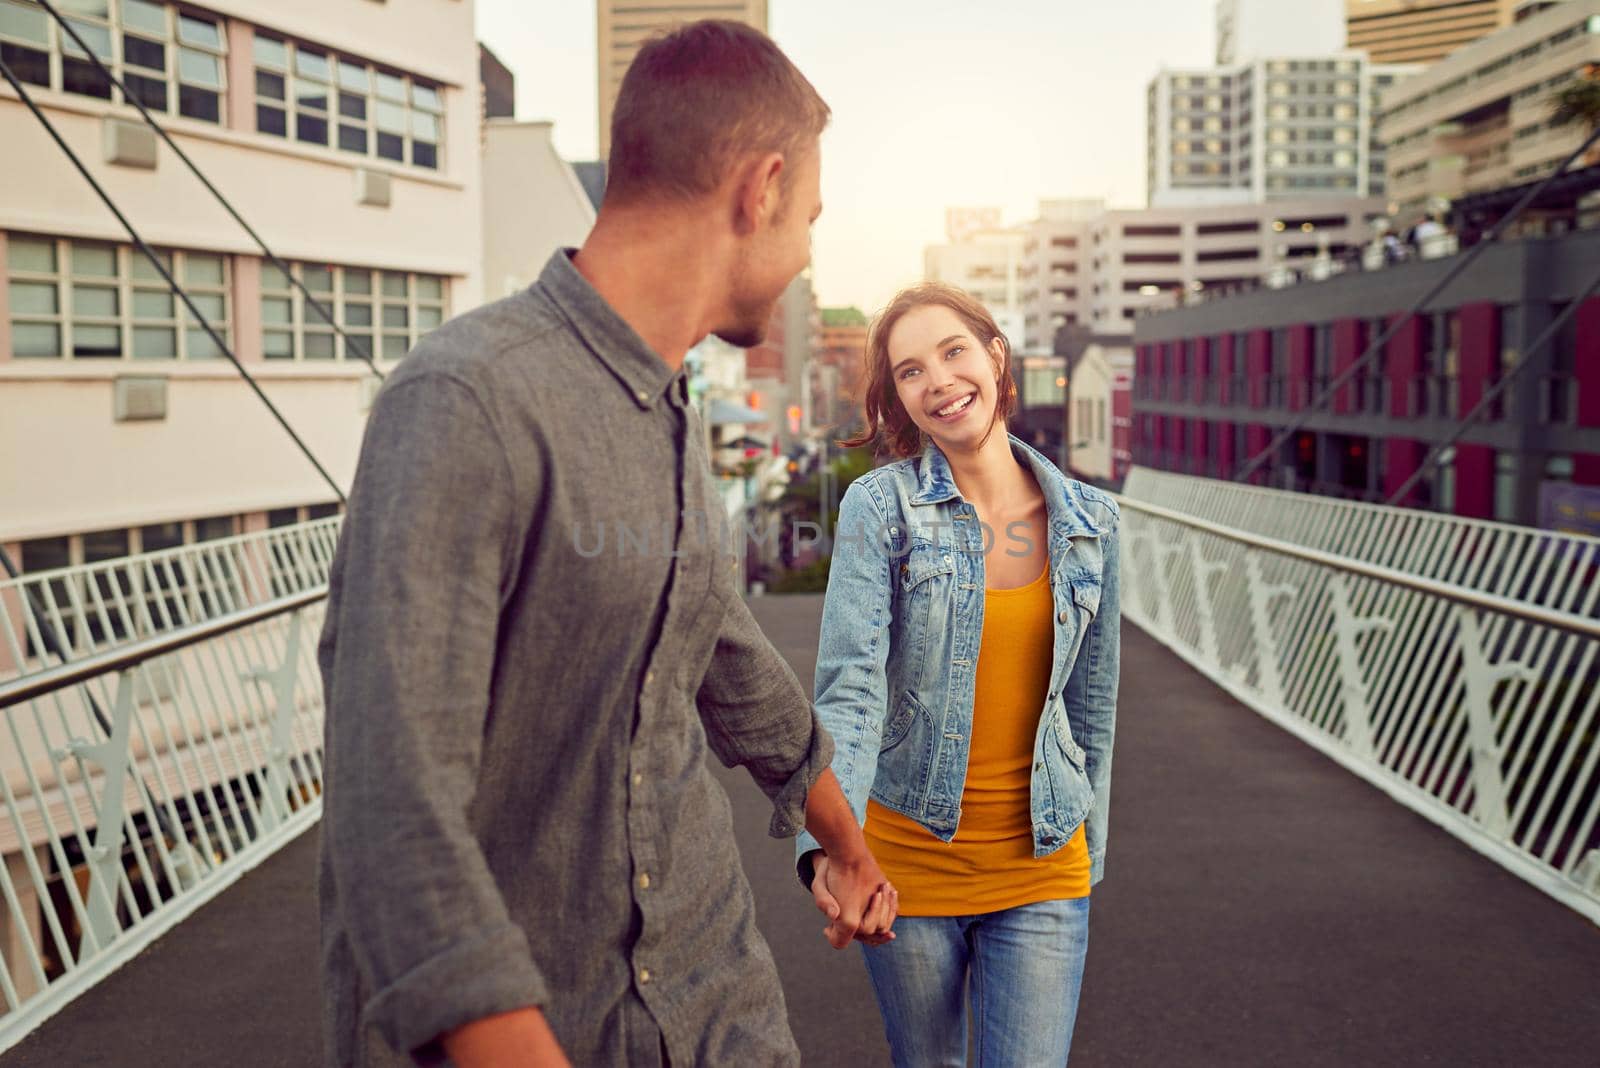 Shot of a happy young couple enjoying a romantic walk together in the city